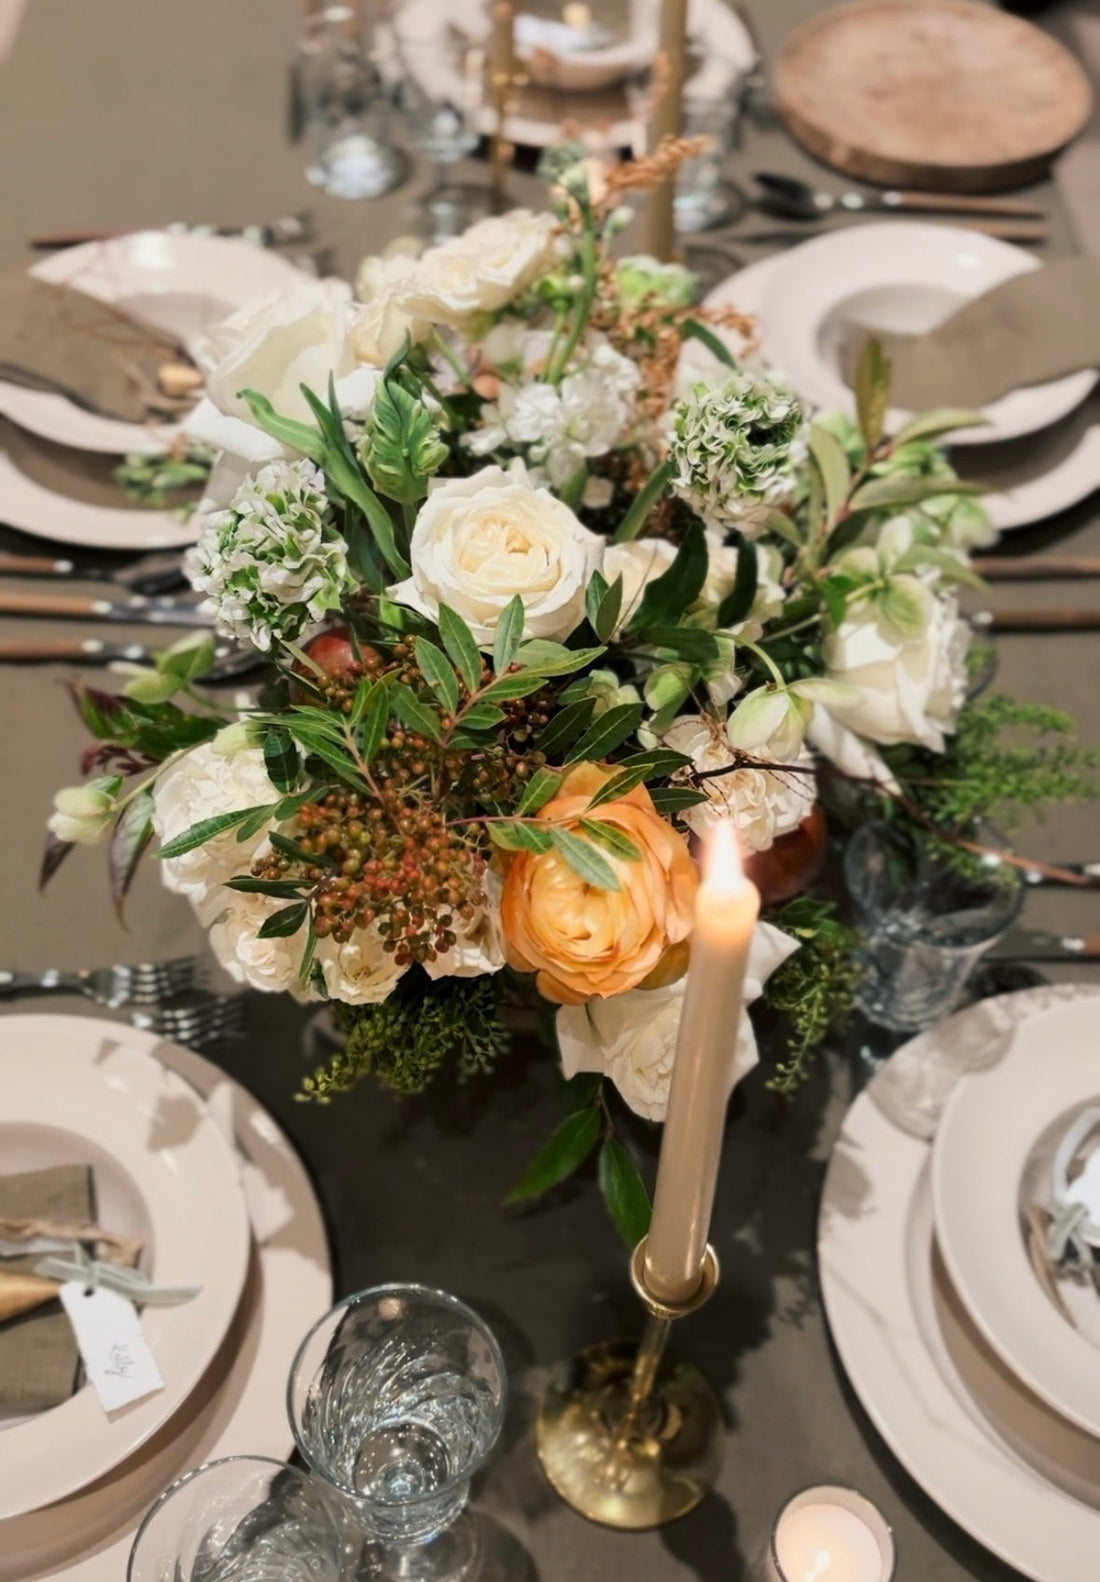 Lauryn Soden of STEMS+CO Shares Her Top Tips for Creating Your Own Floral Arrangements